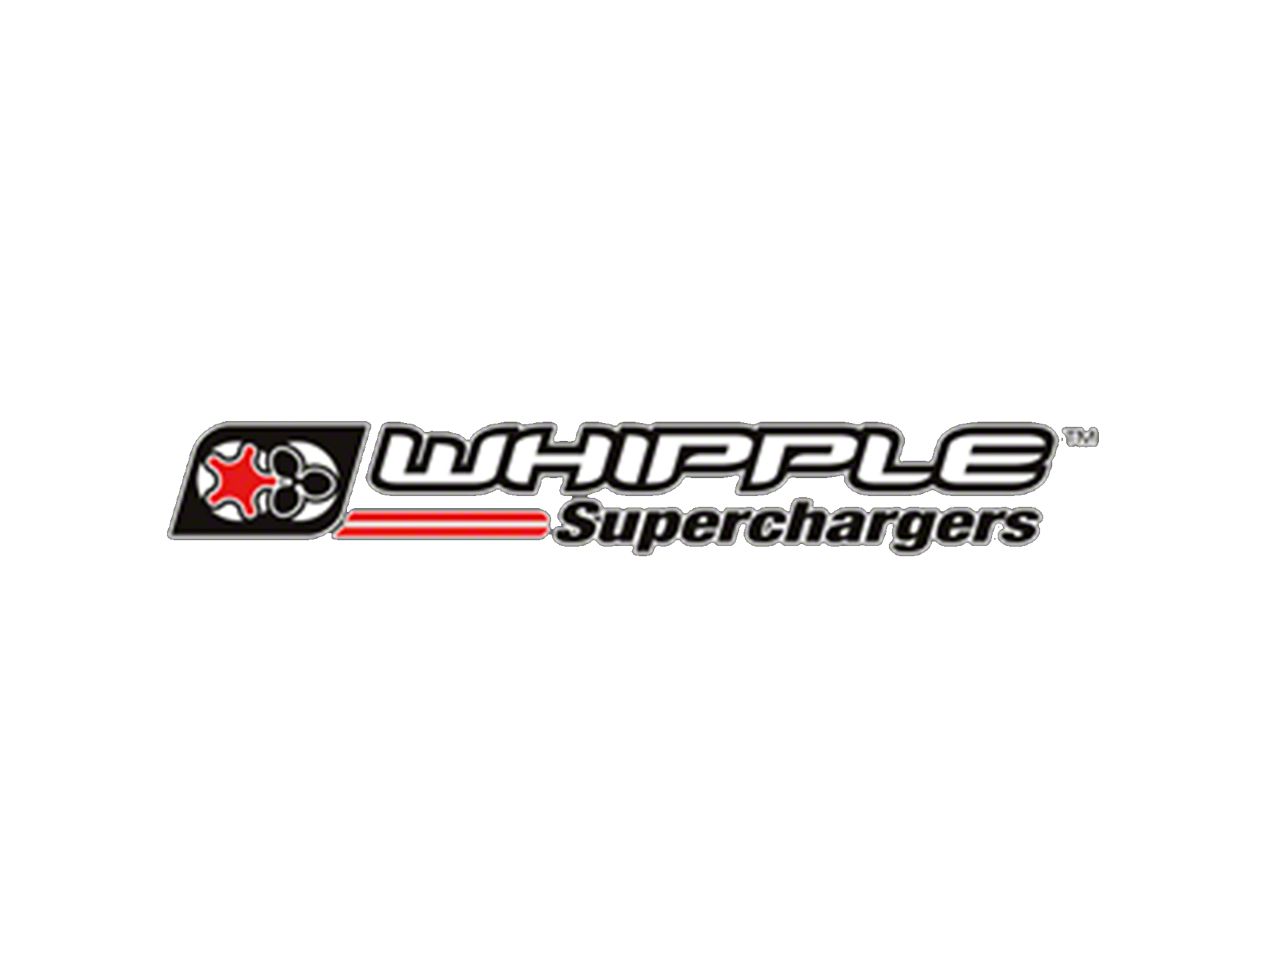 Whipple Supercharger & Parts